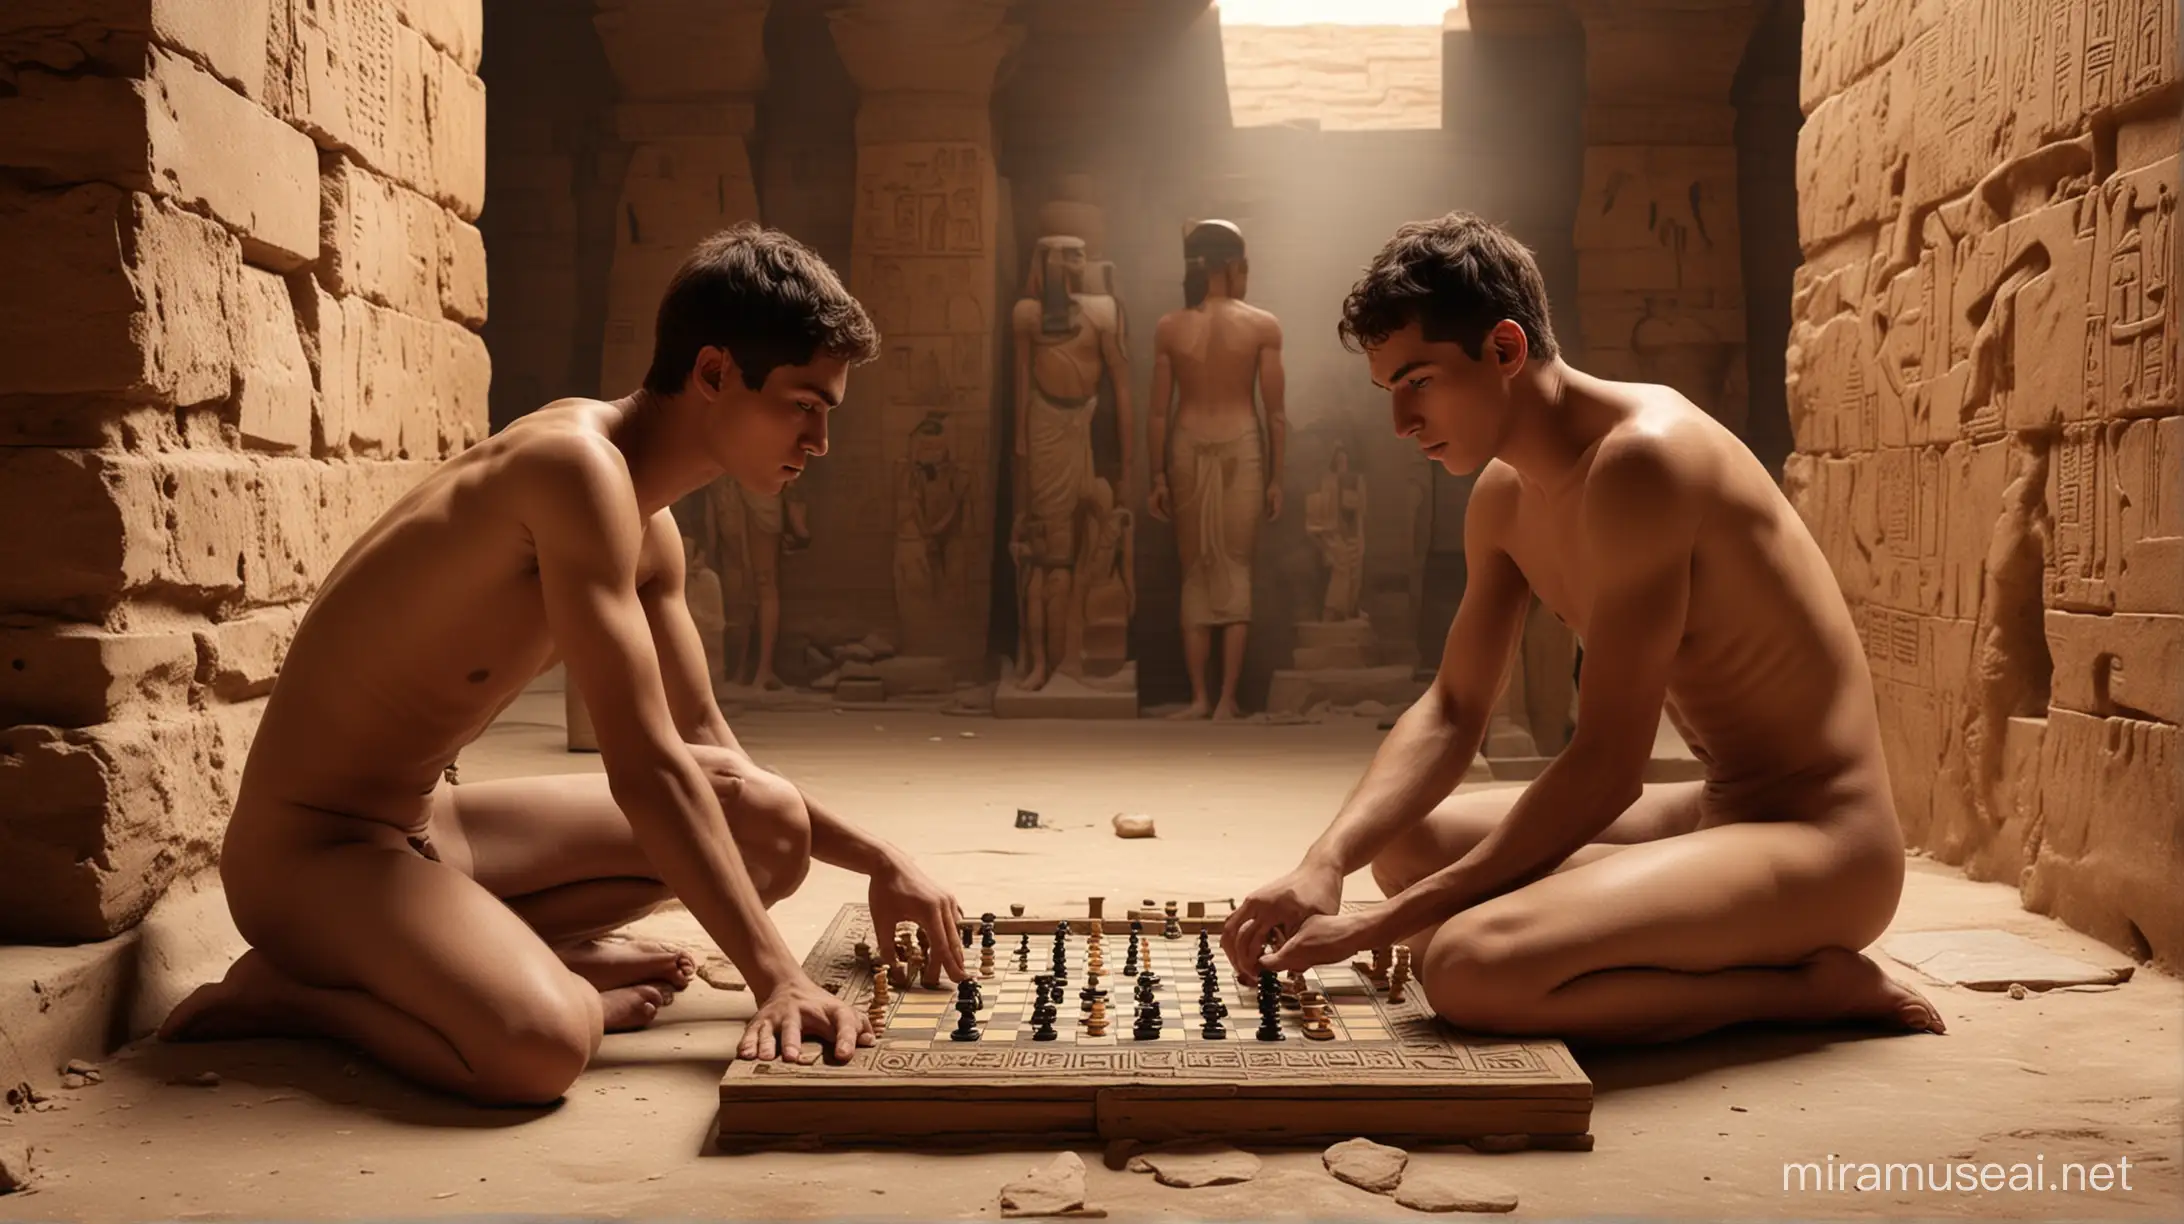 a realistic image os two nude young men, playing checkers inside of an ancient Egyptian tomb